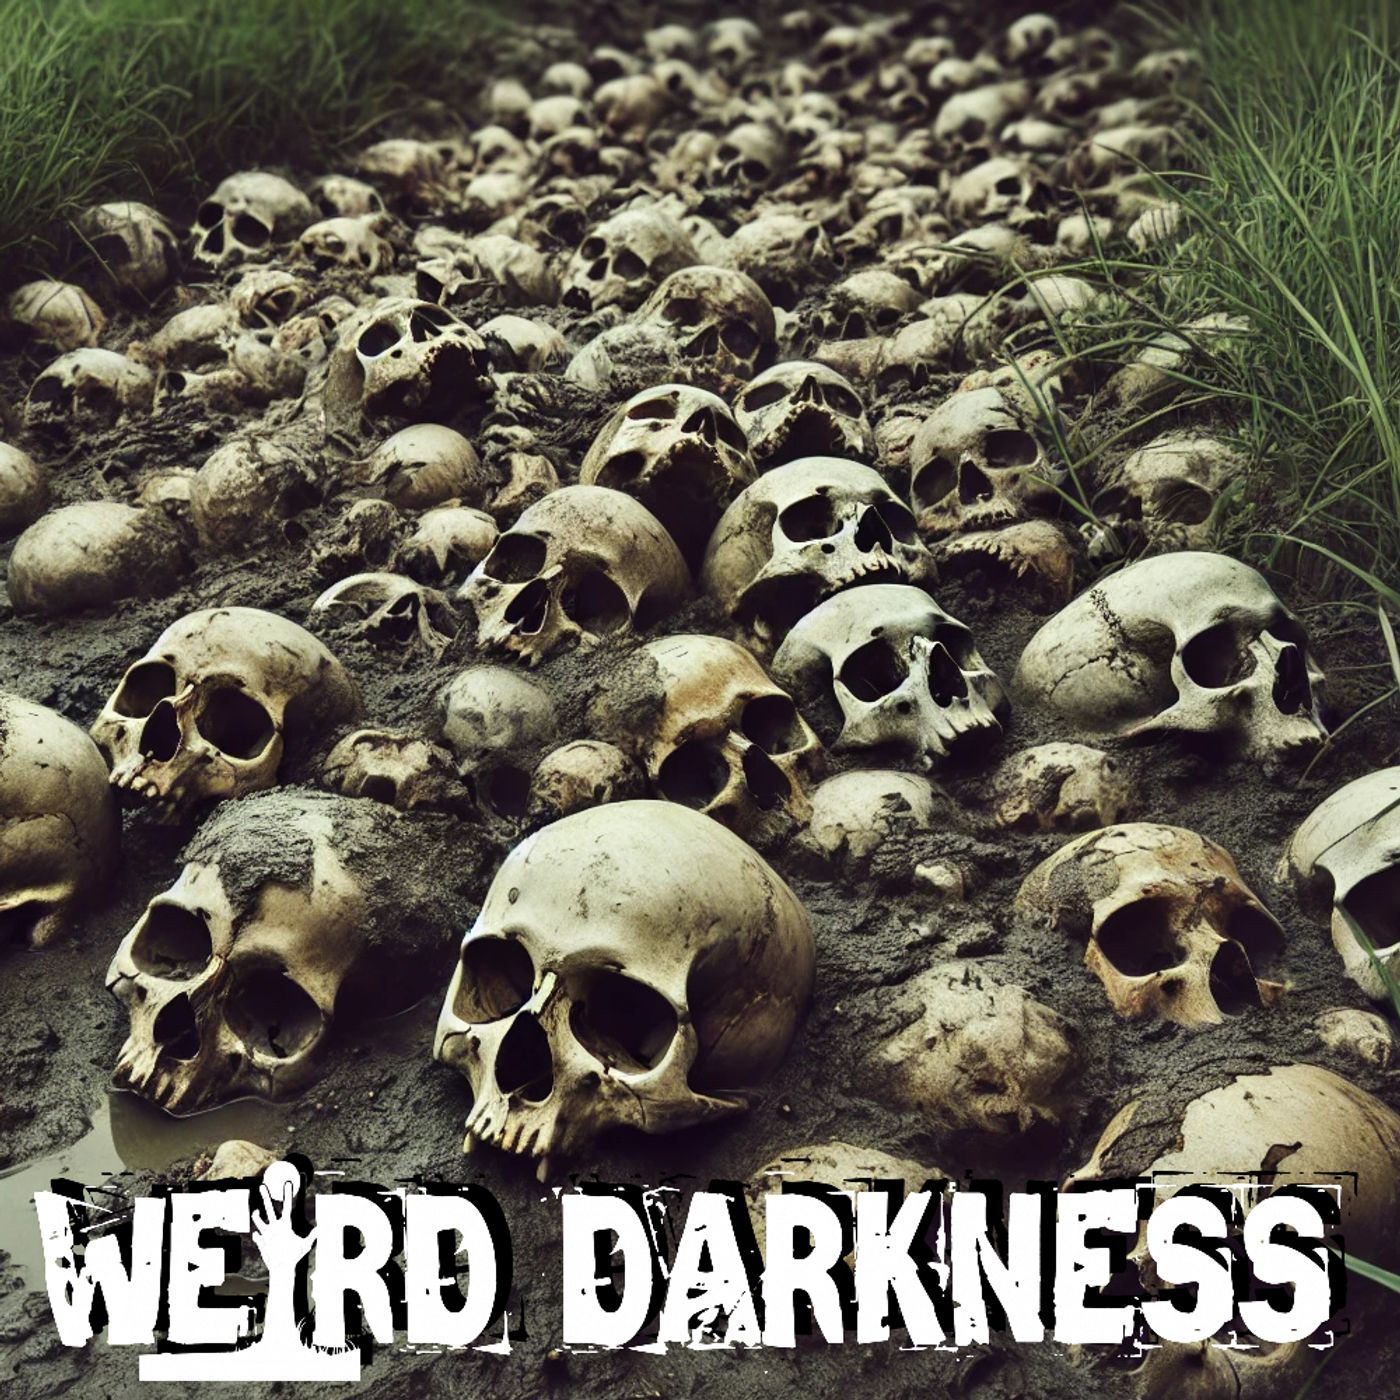 “THE LAND OF 10,000 UNMARKED GRAVES” - More True Tales, and a CreepyPasta! #WeirdDarkness #Darkives